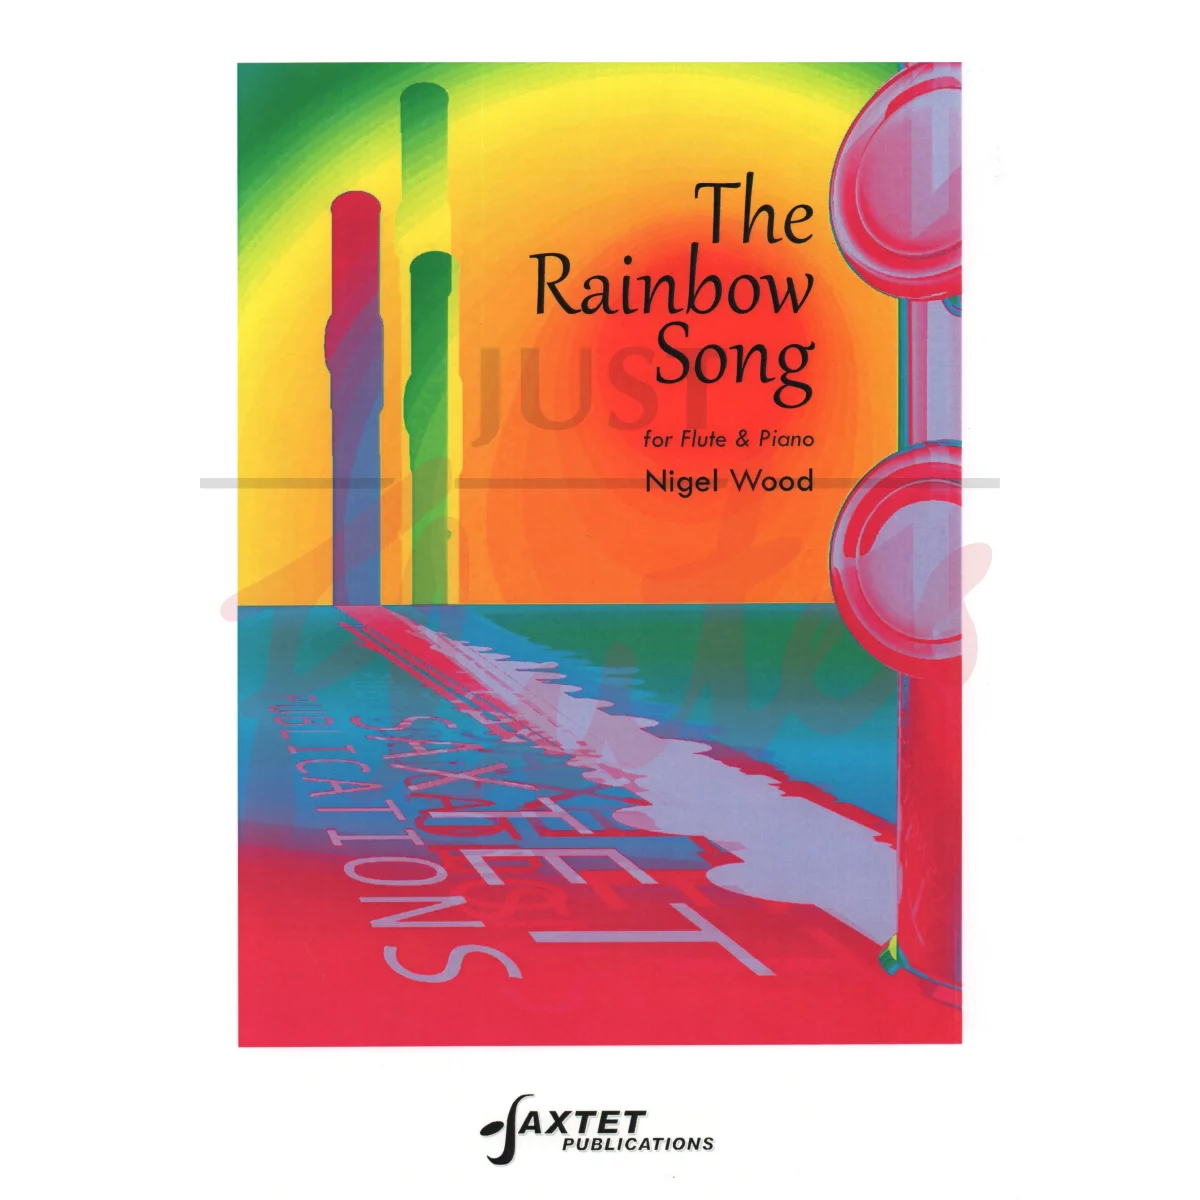 The Rainbow Song for Flute and Piano